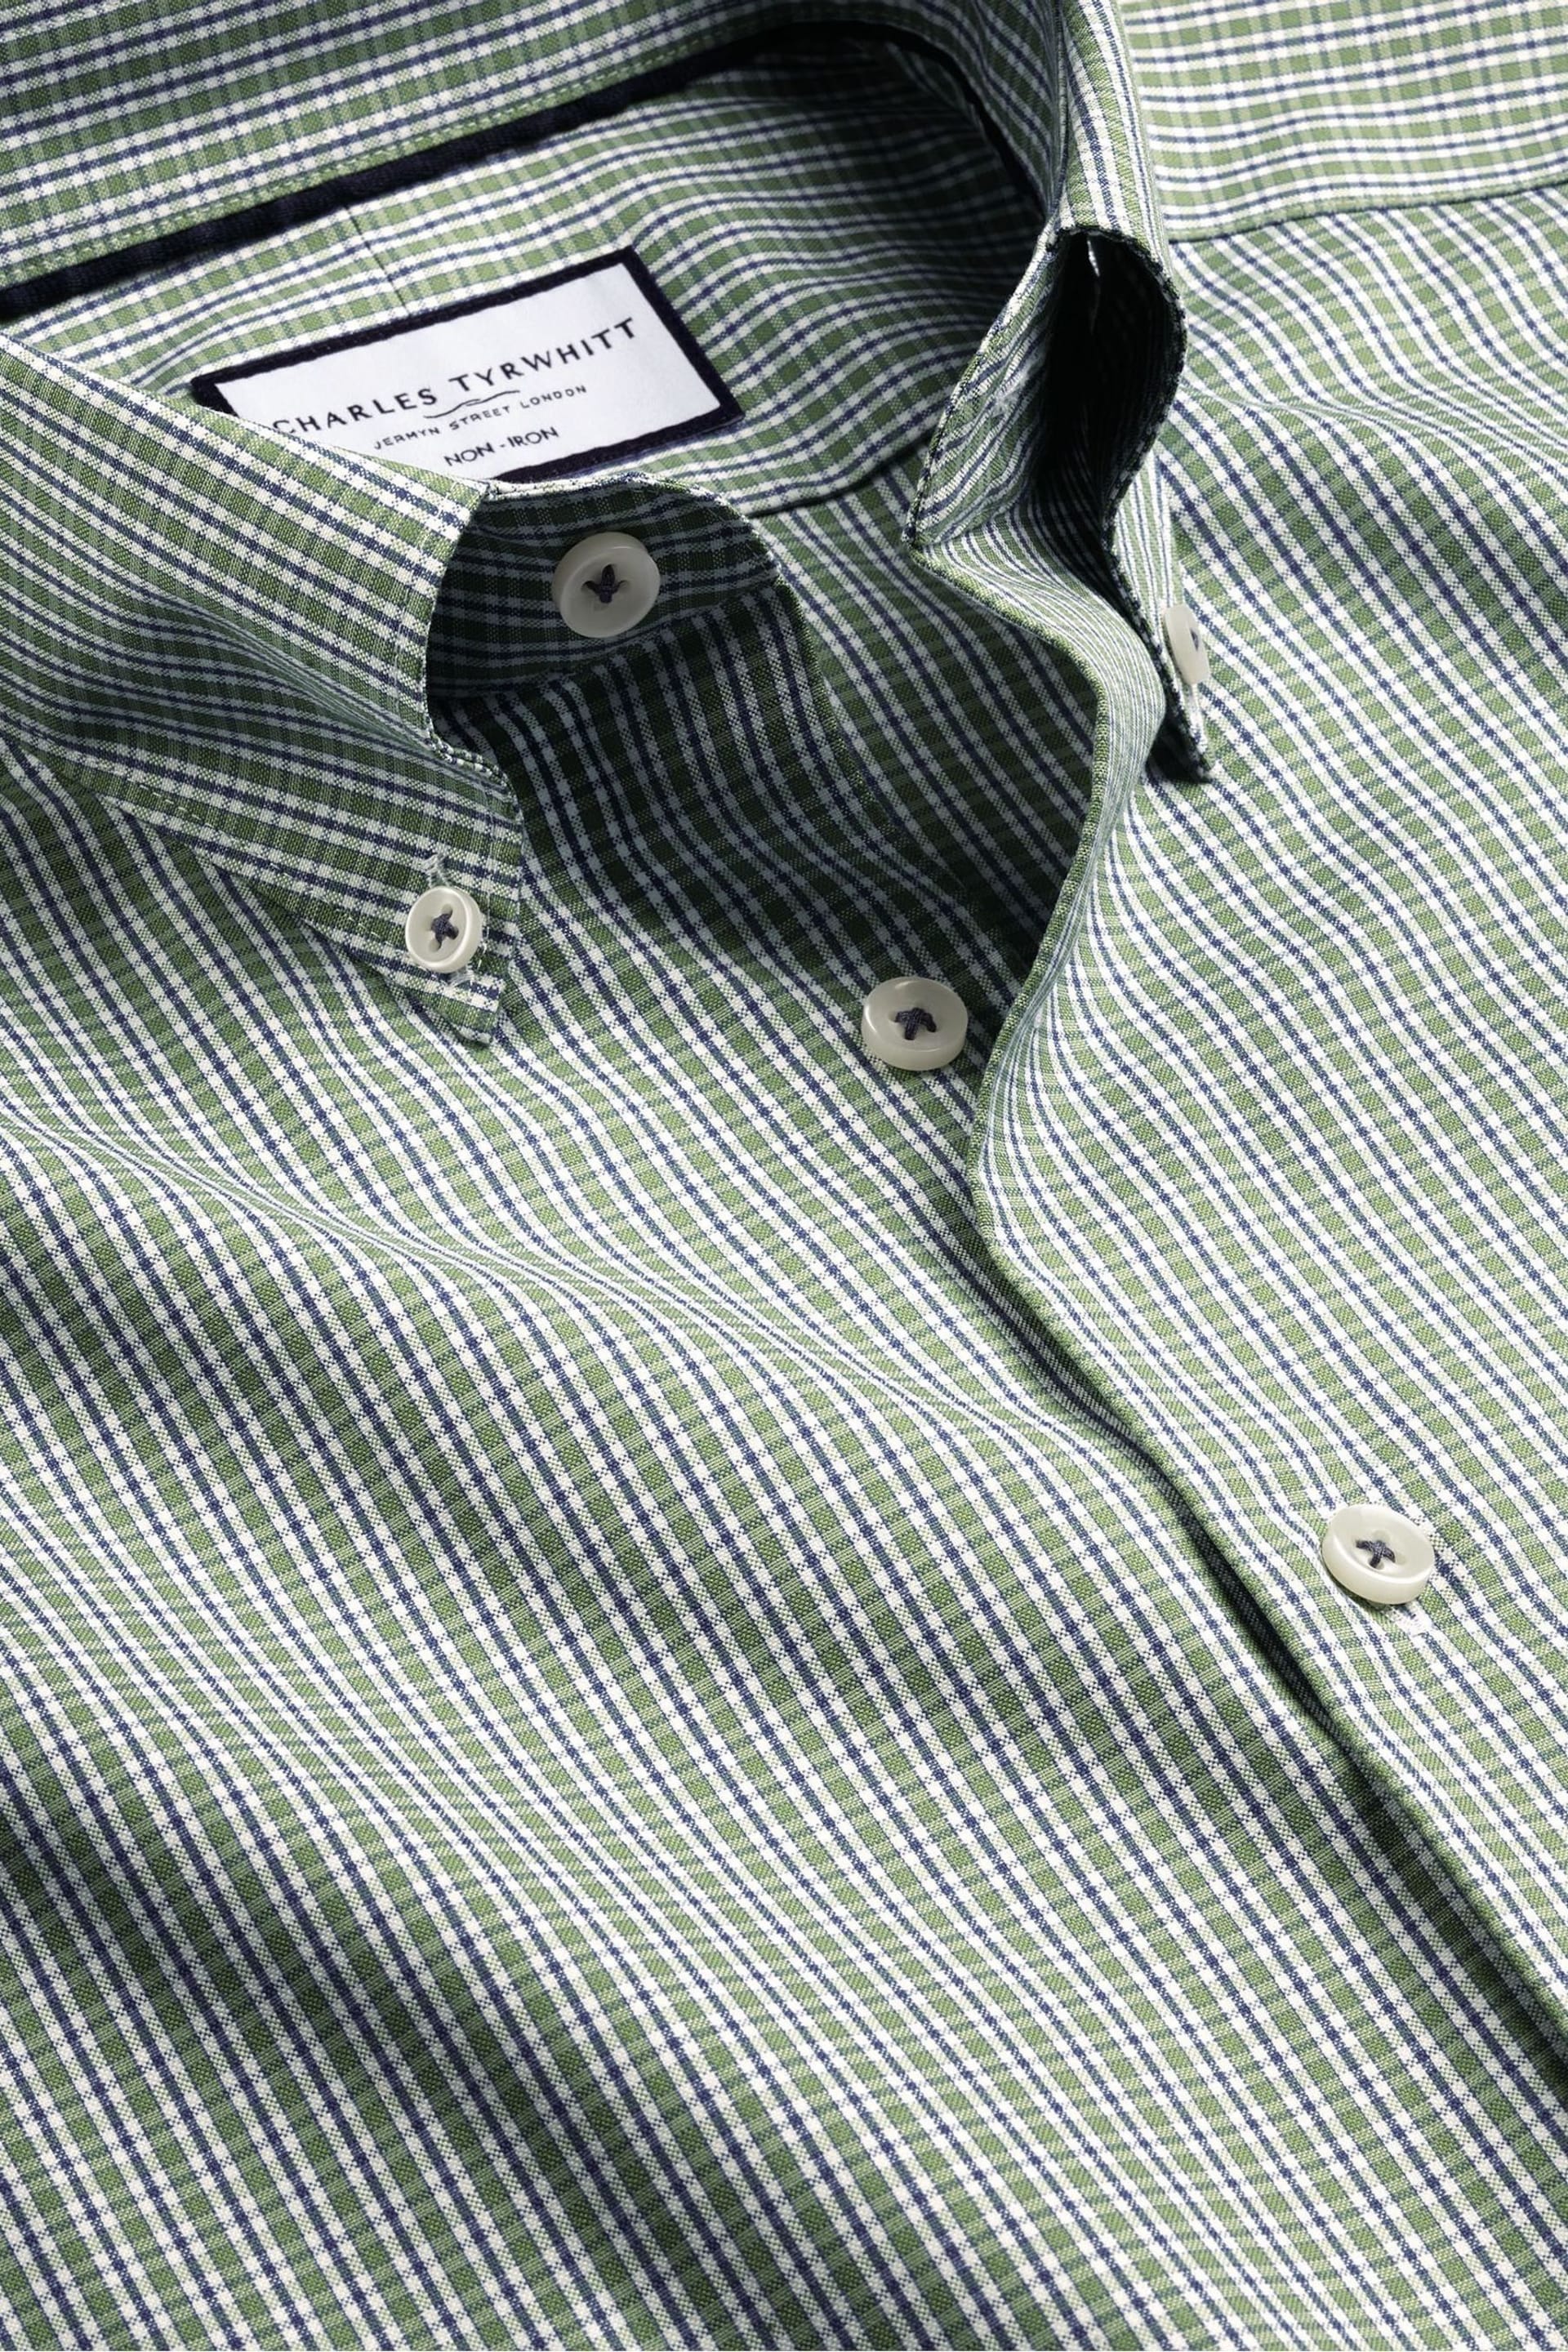 Charles Tyrwhitt Green Check Non-iron Button-Down Oxford Slim Fit Shirt - Image 5 of 5